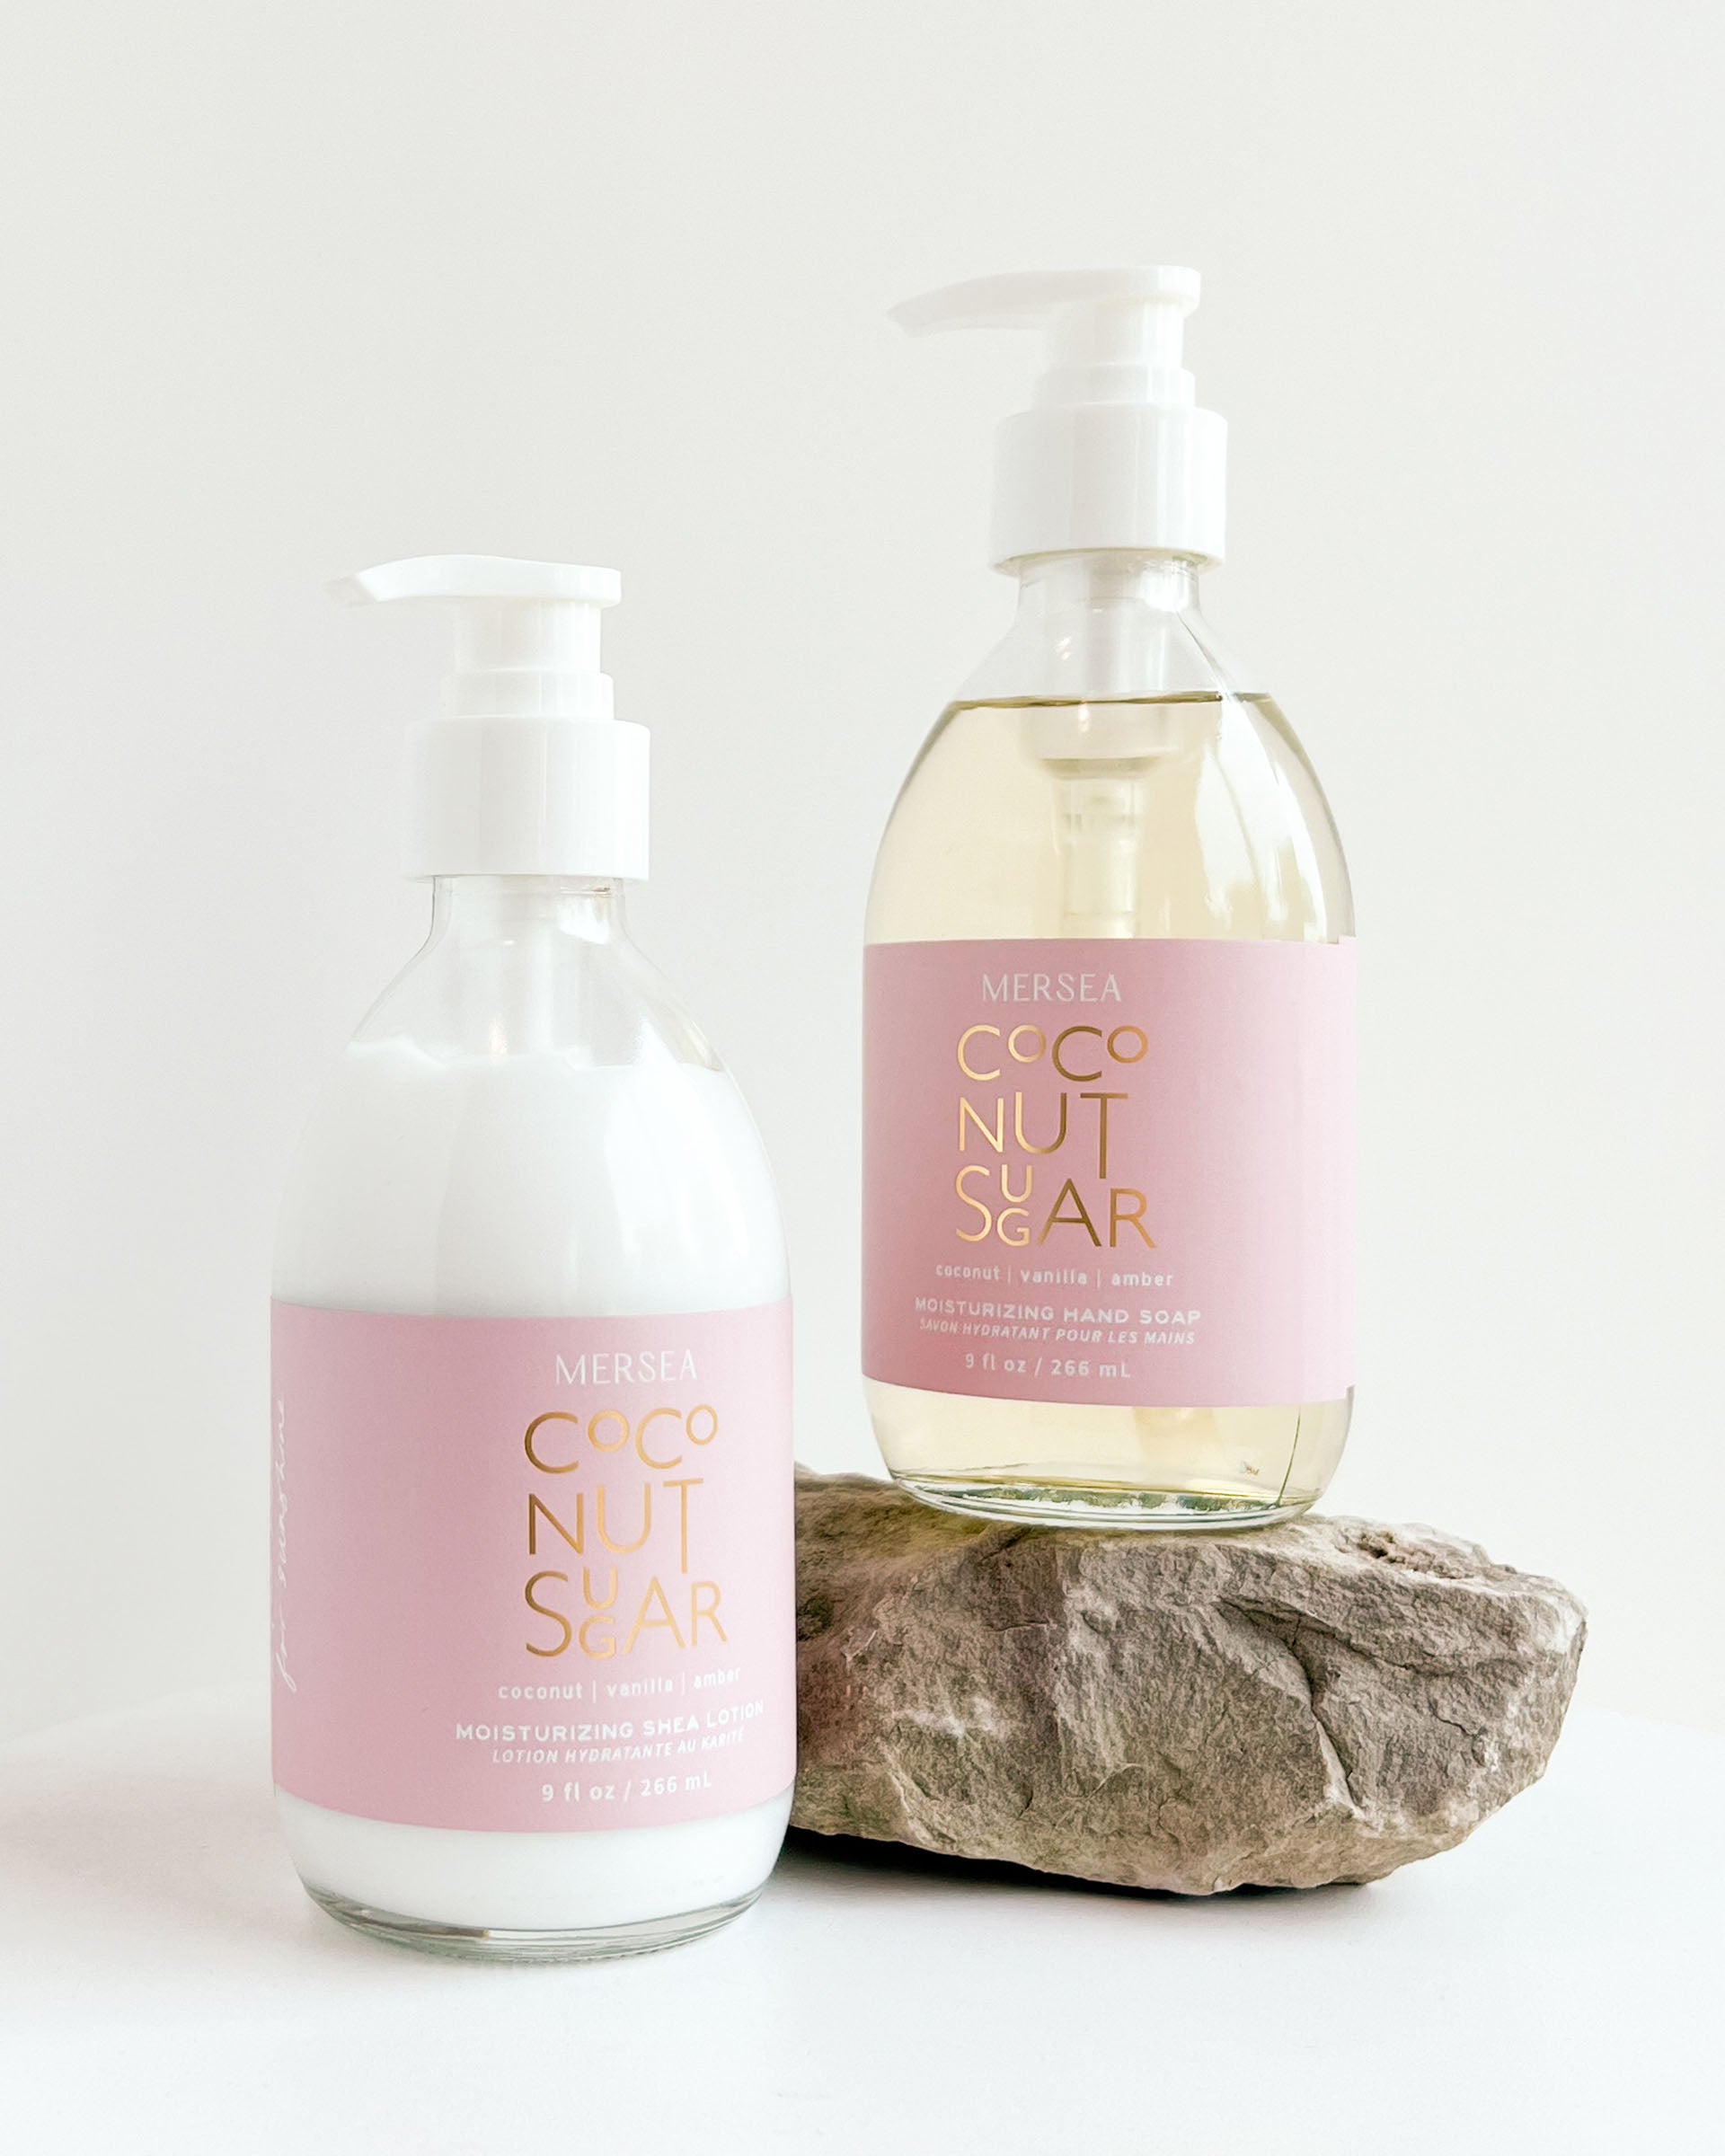 mersea coconut sugar liquid hand soap and lotion on white background